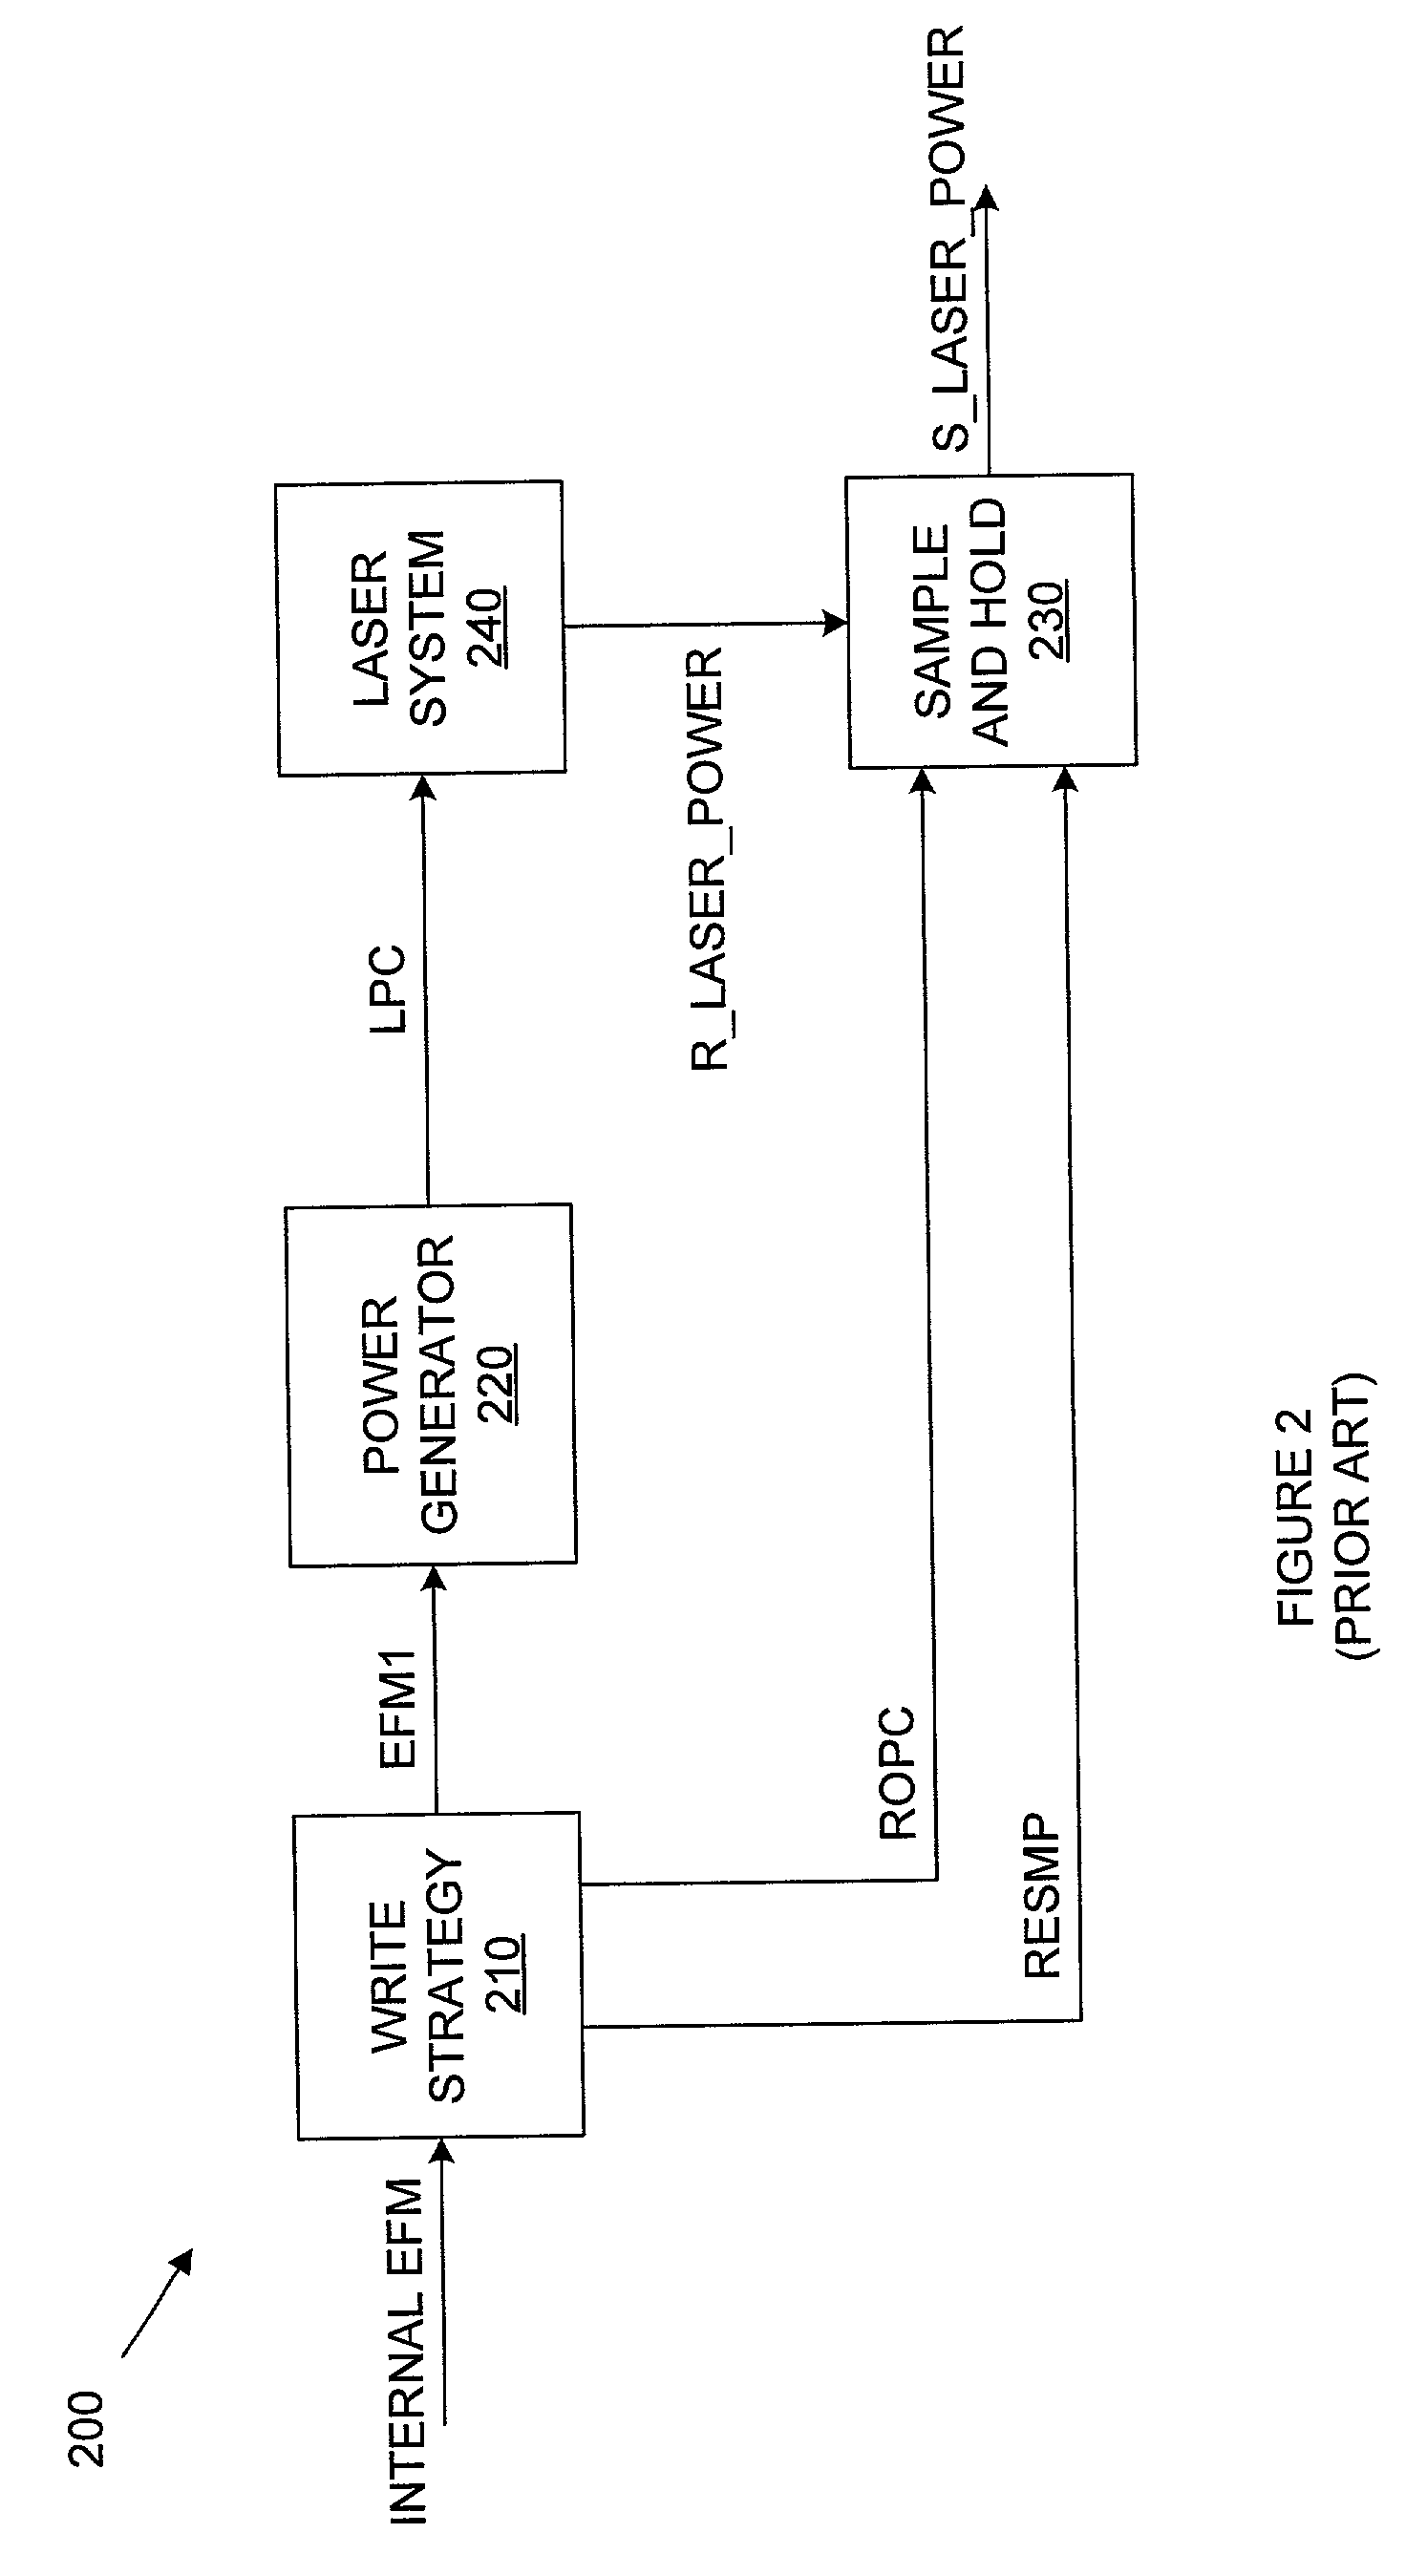 Read and write sample and hold signal generation